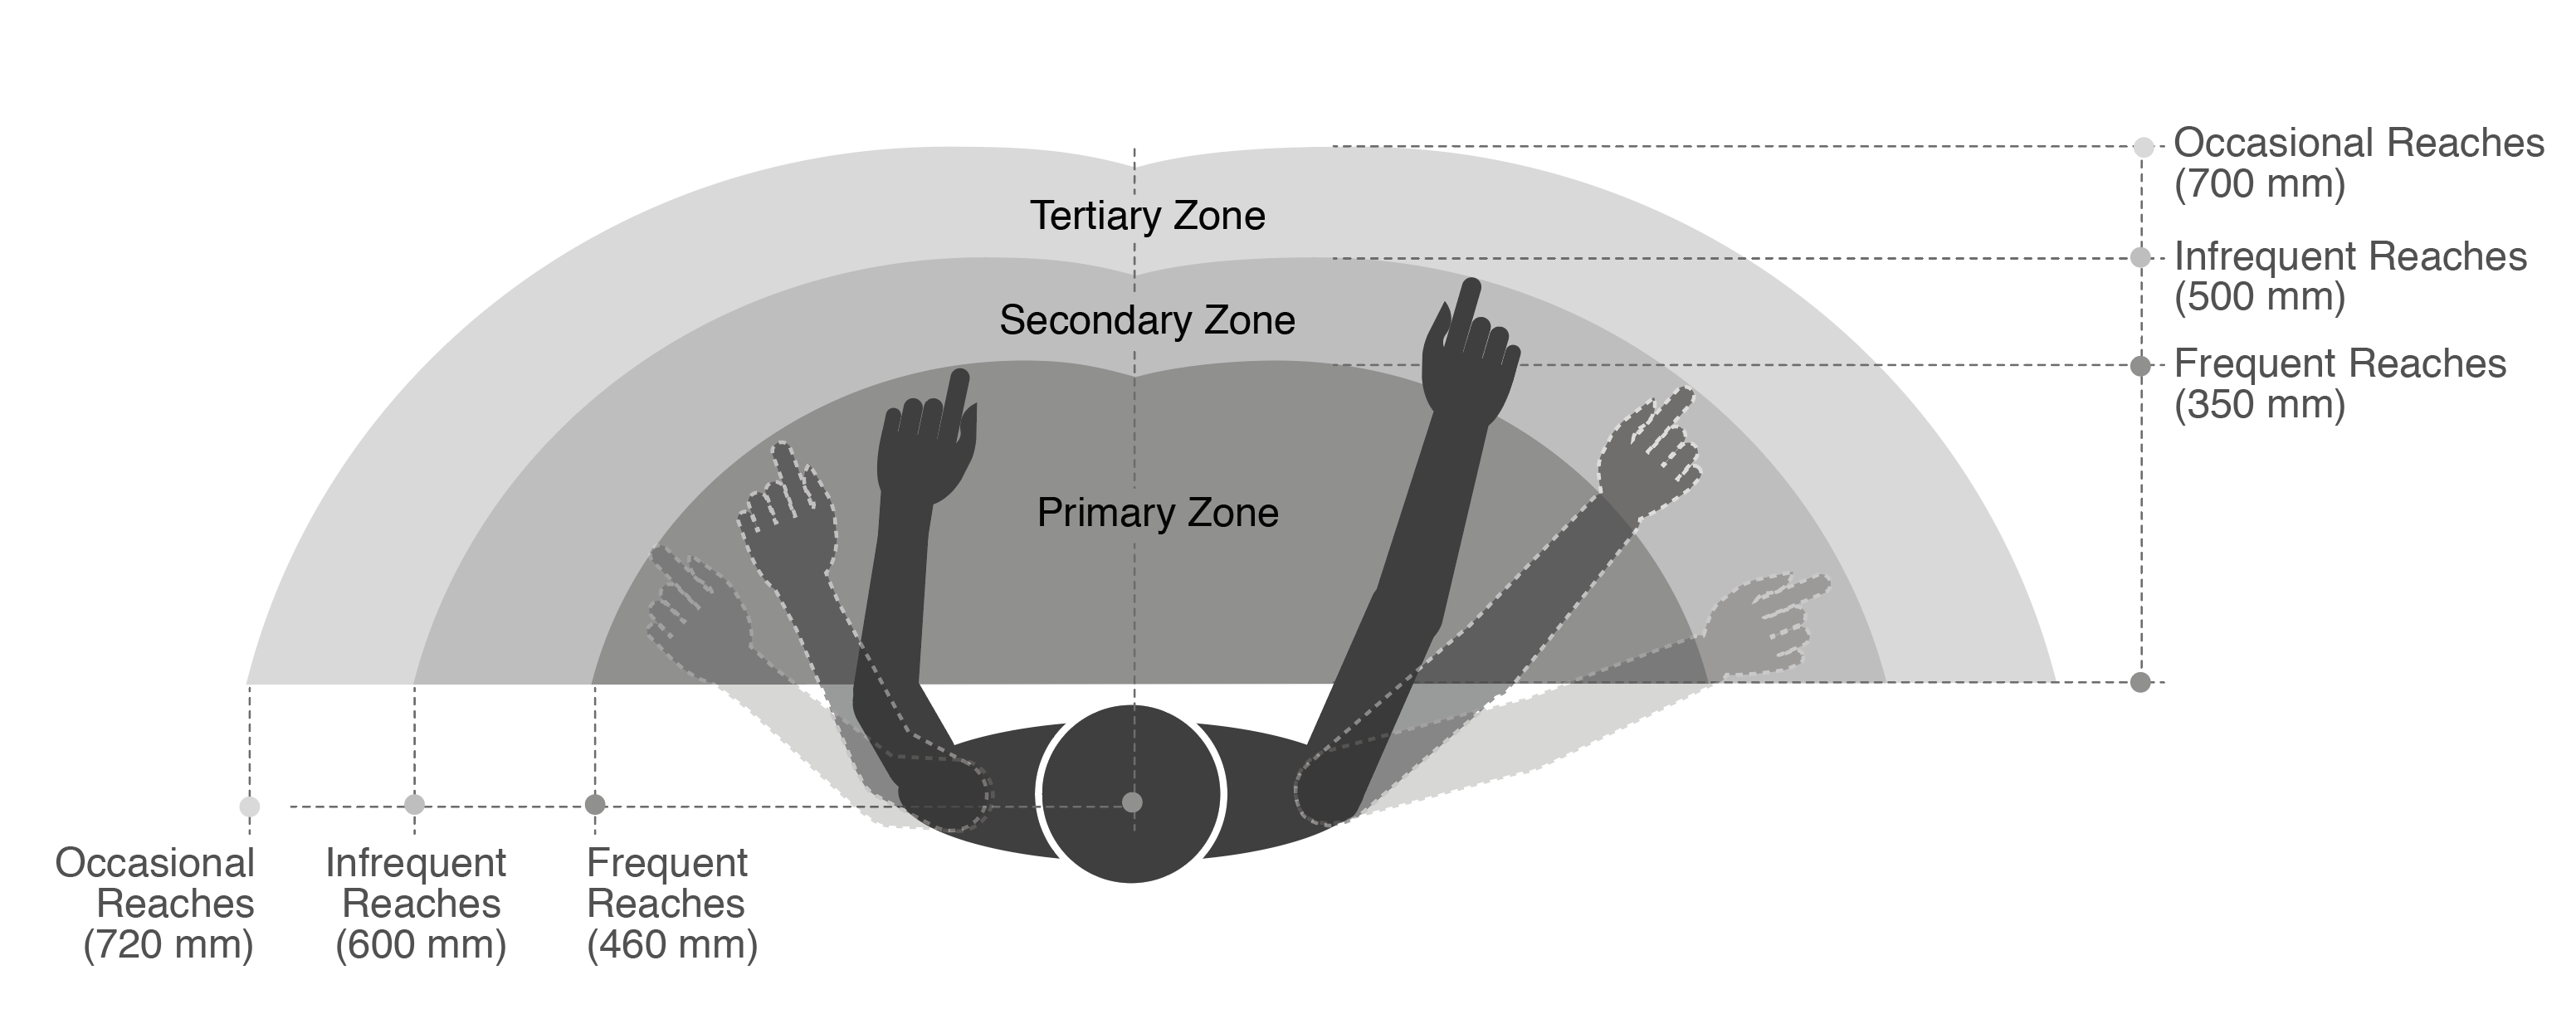 Illustration showing the Primary, Secondary and Tertiary zones of an office desk 